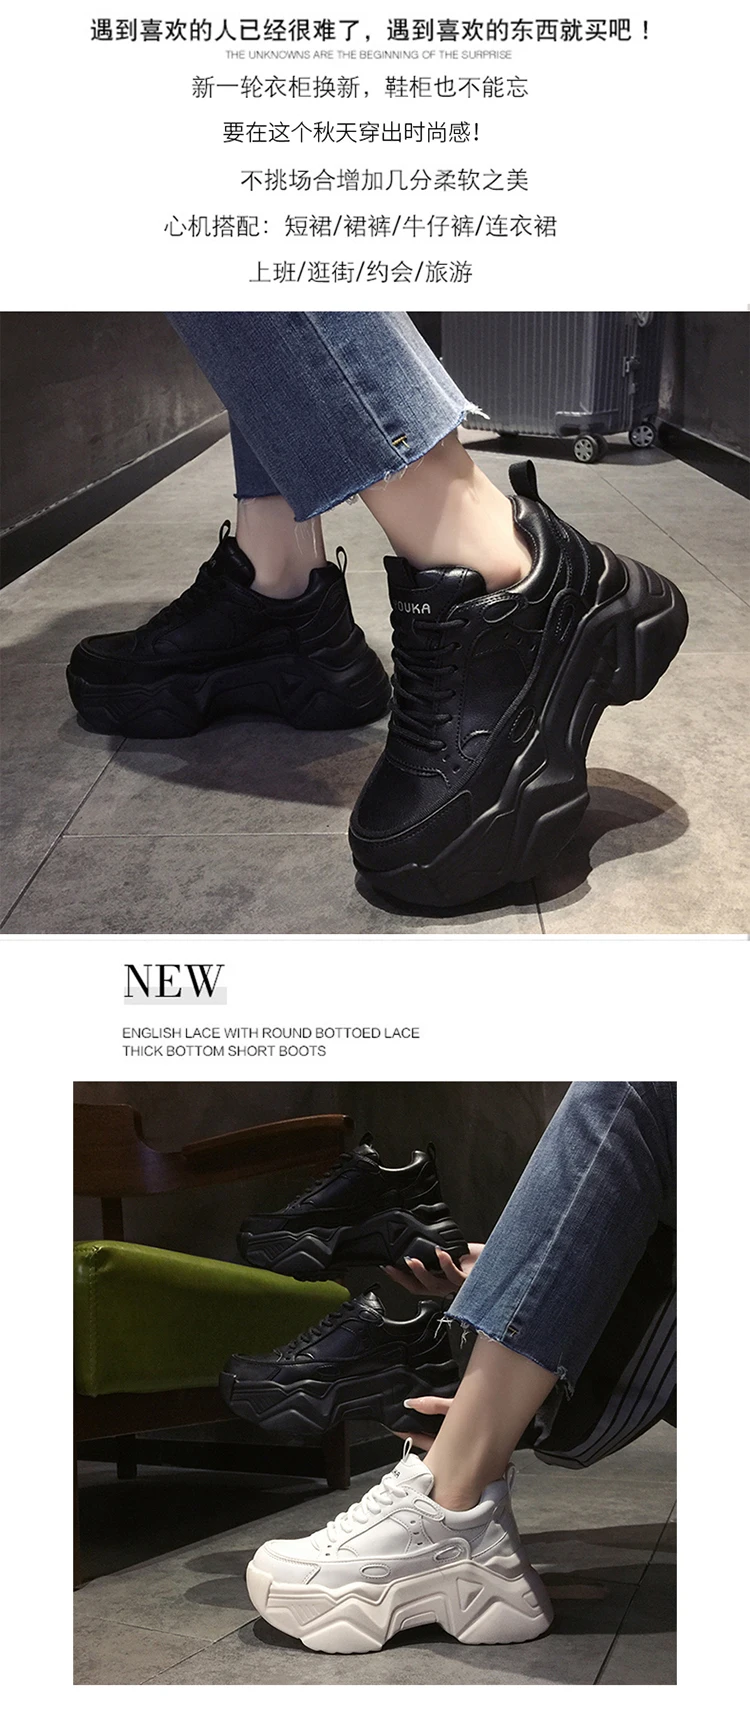 Women Platform Sneakers Leather Casual Ladies Chunky Shoes 2021 White Woman High Black Fashion Brand Thick soled Wedge Sneakers